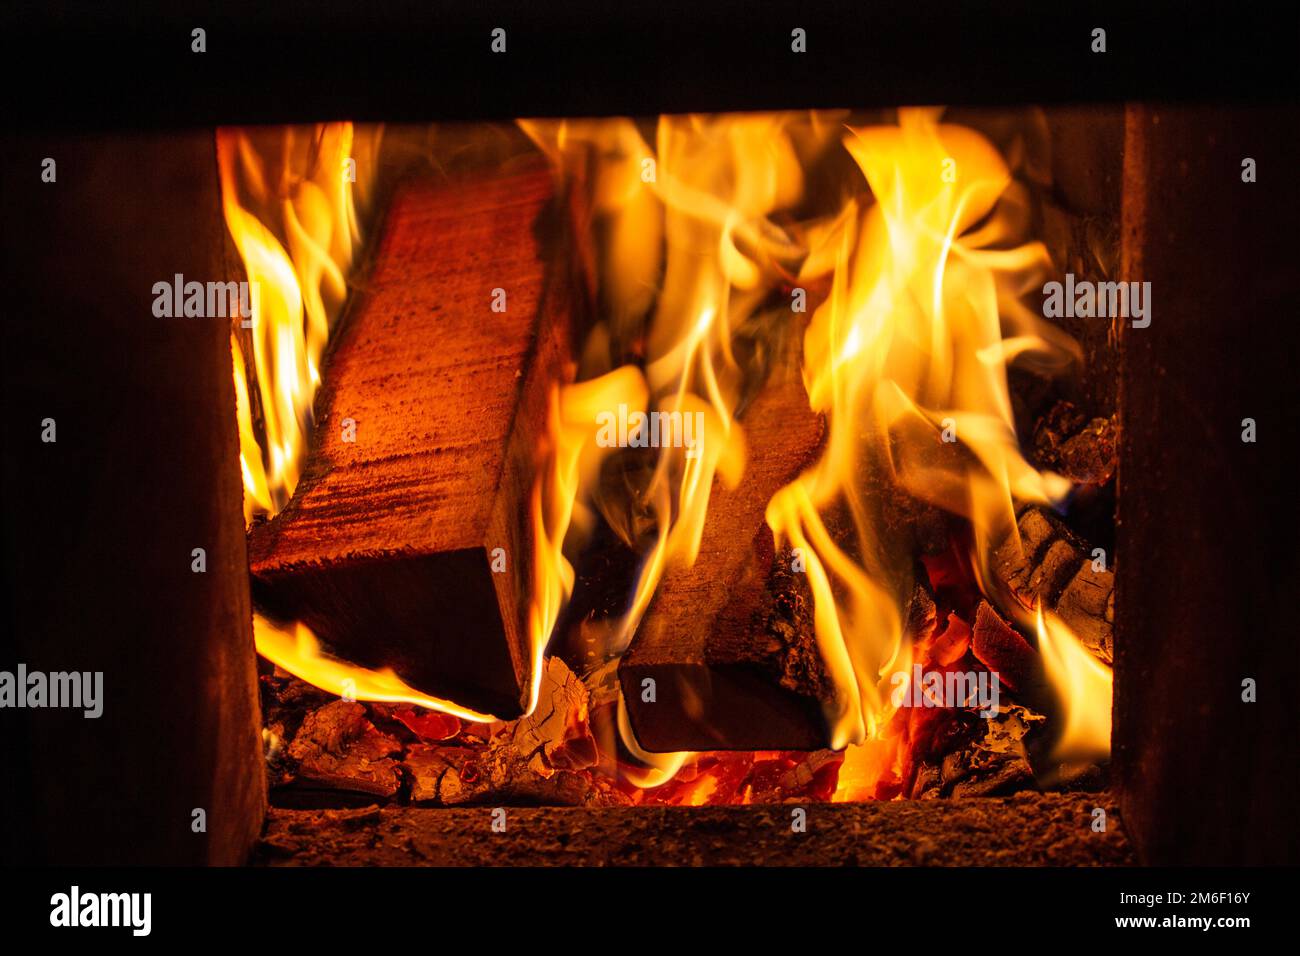 Wood burning in furnace in a home during winter. Stock Photo